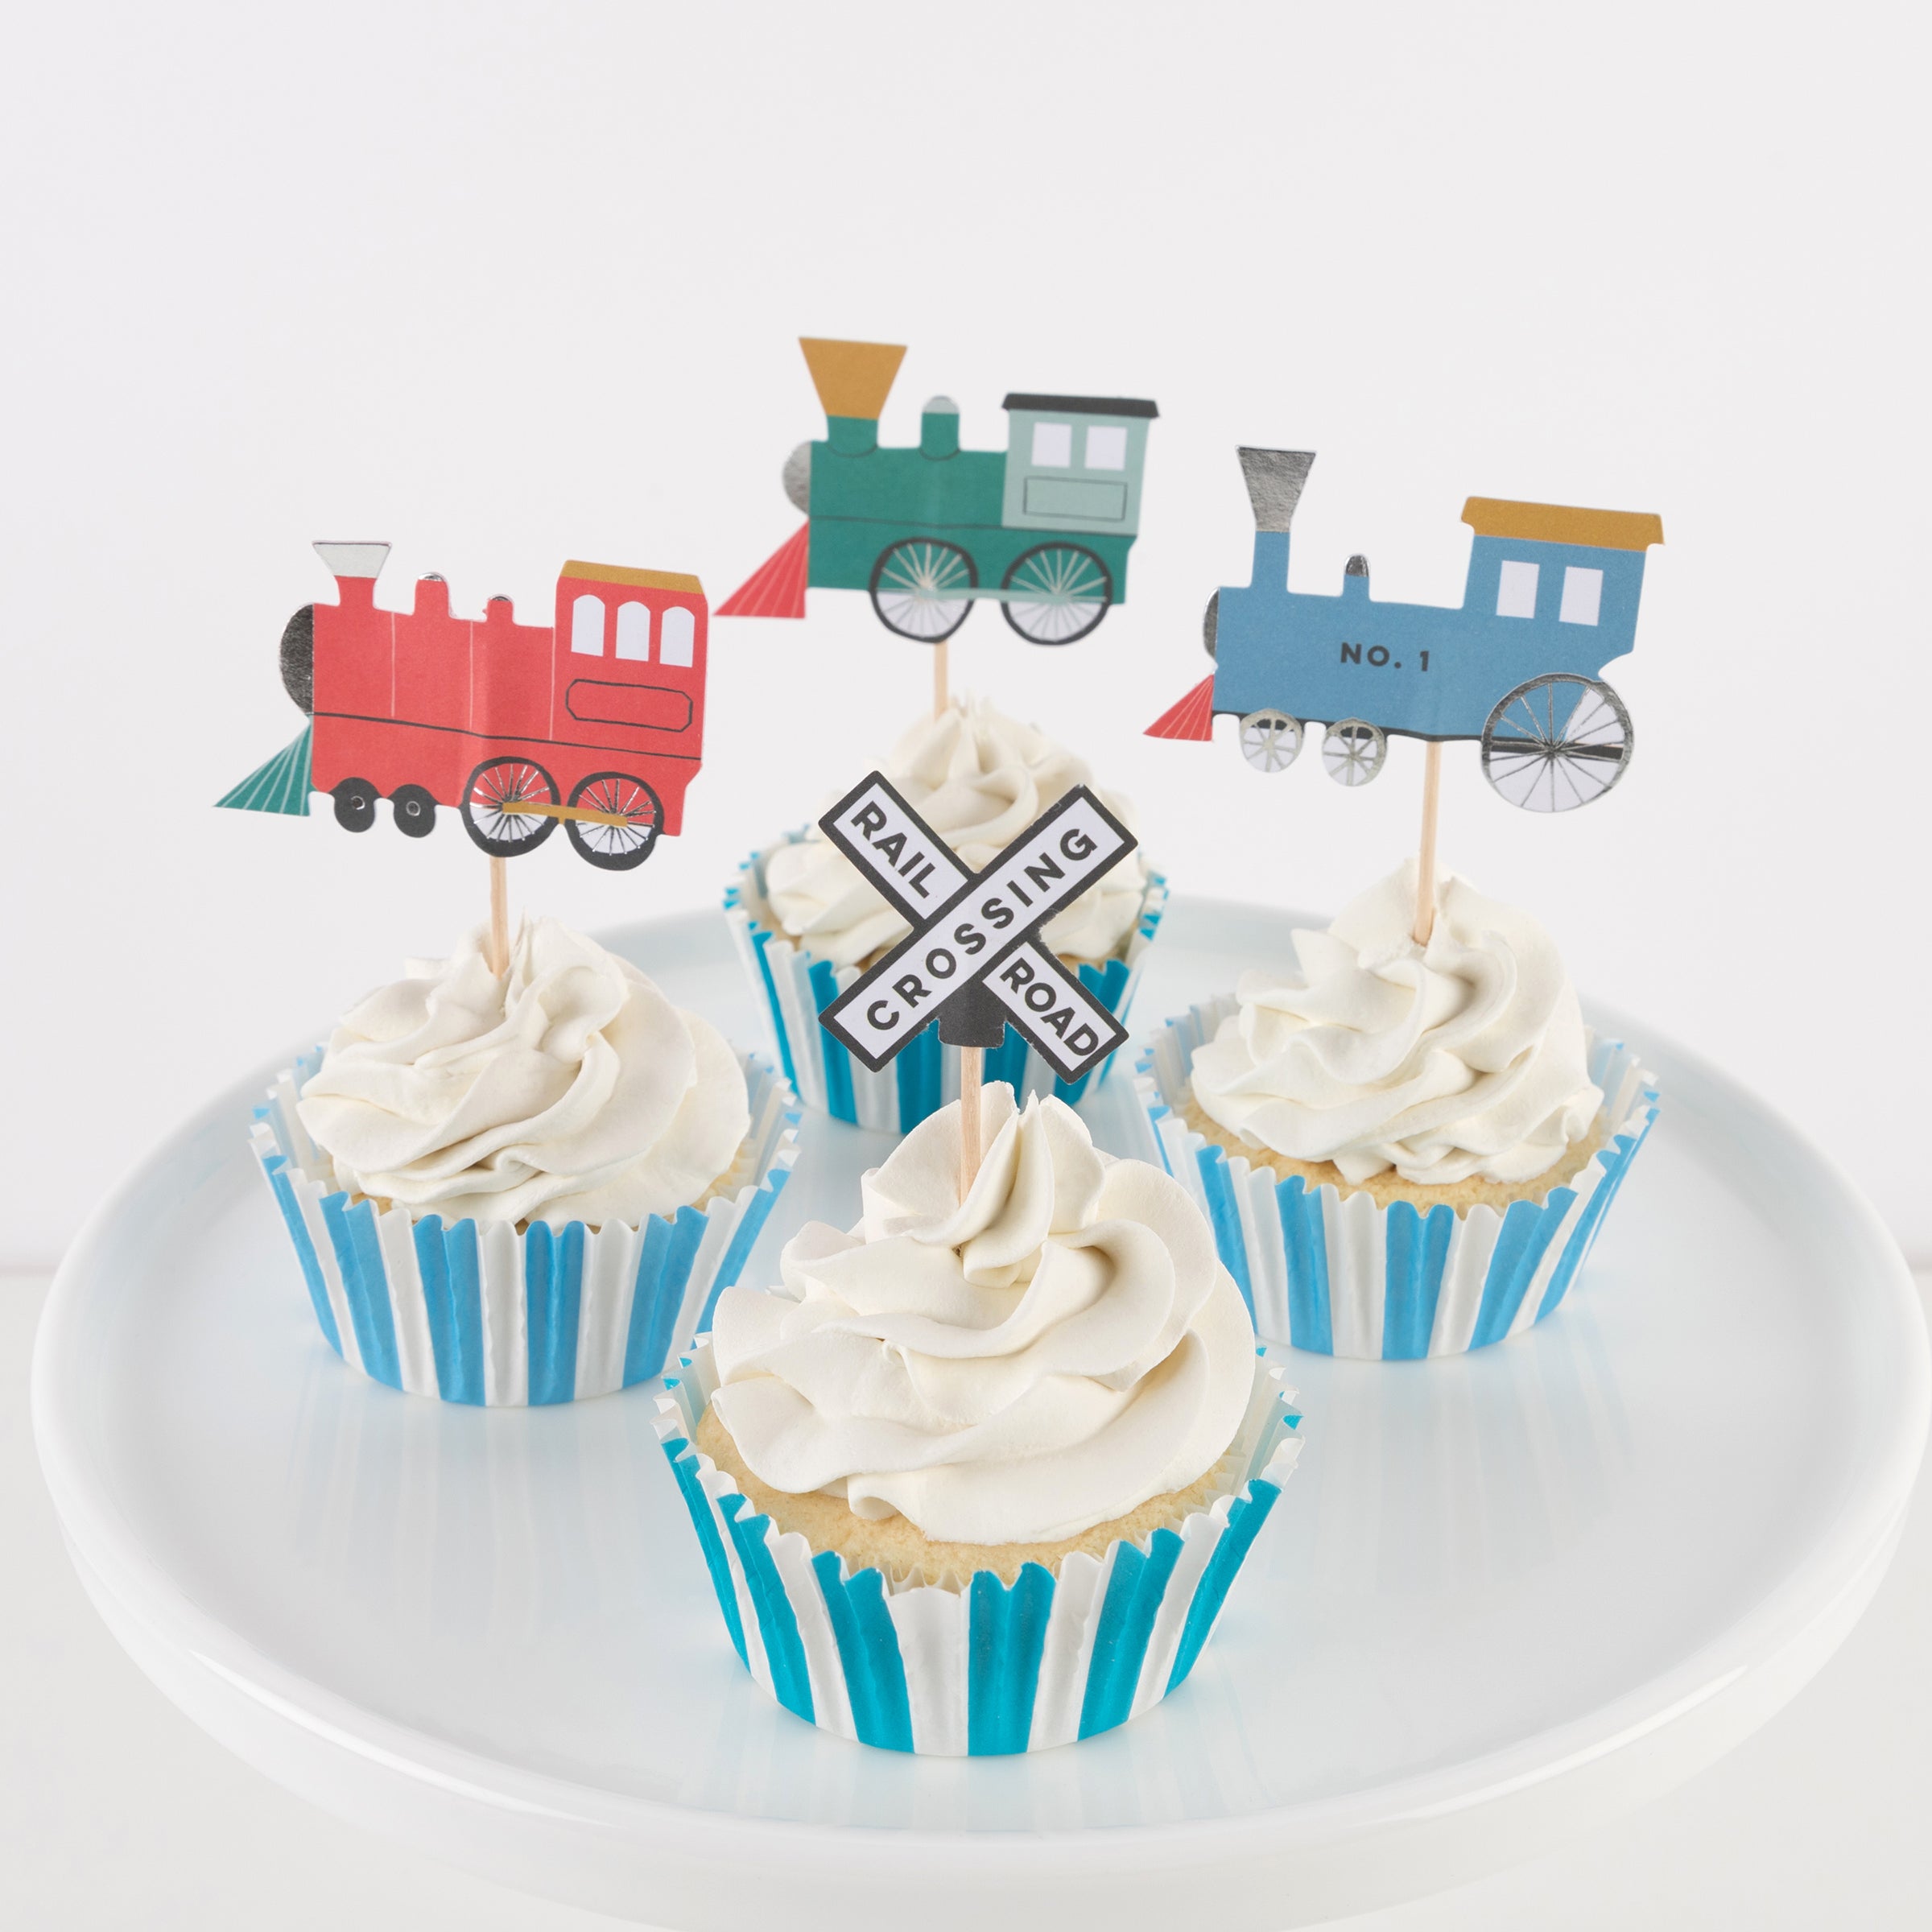 Our special cupcake kit feature train cake toppers and striped blue and teal cupcake cases.